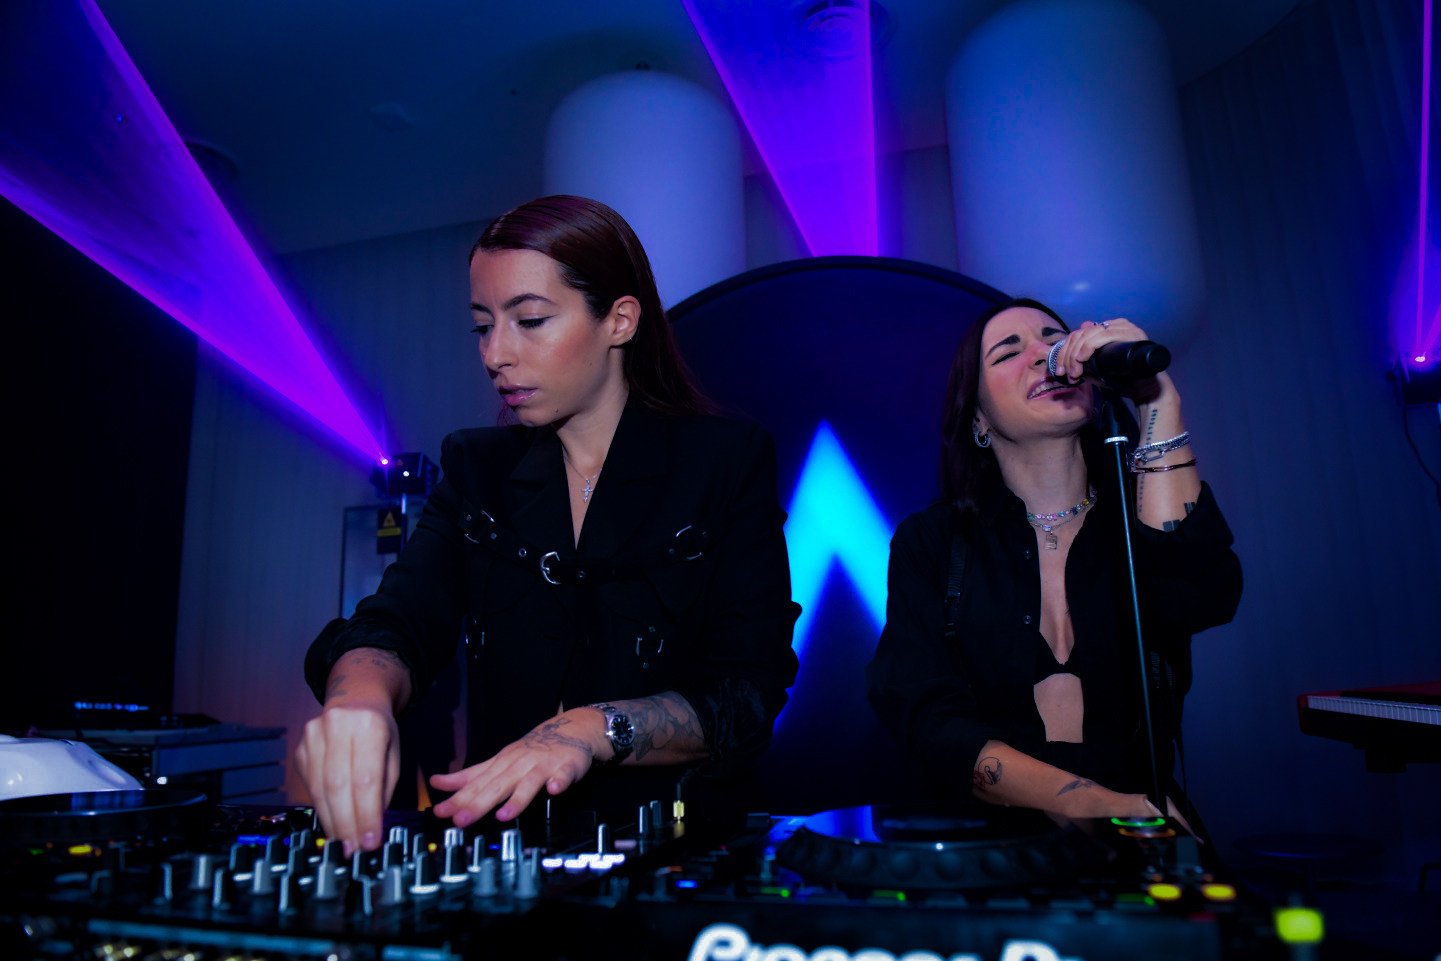 EDM artists Gioli & Assia perform at a W Presents event at the W Osaka hotel in Japan. Photo: W Osaka